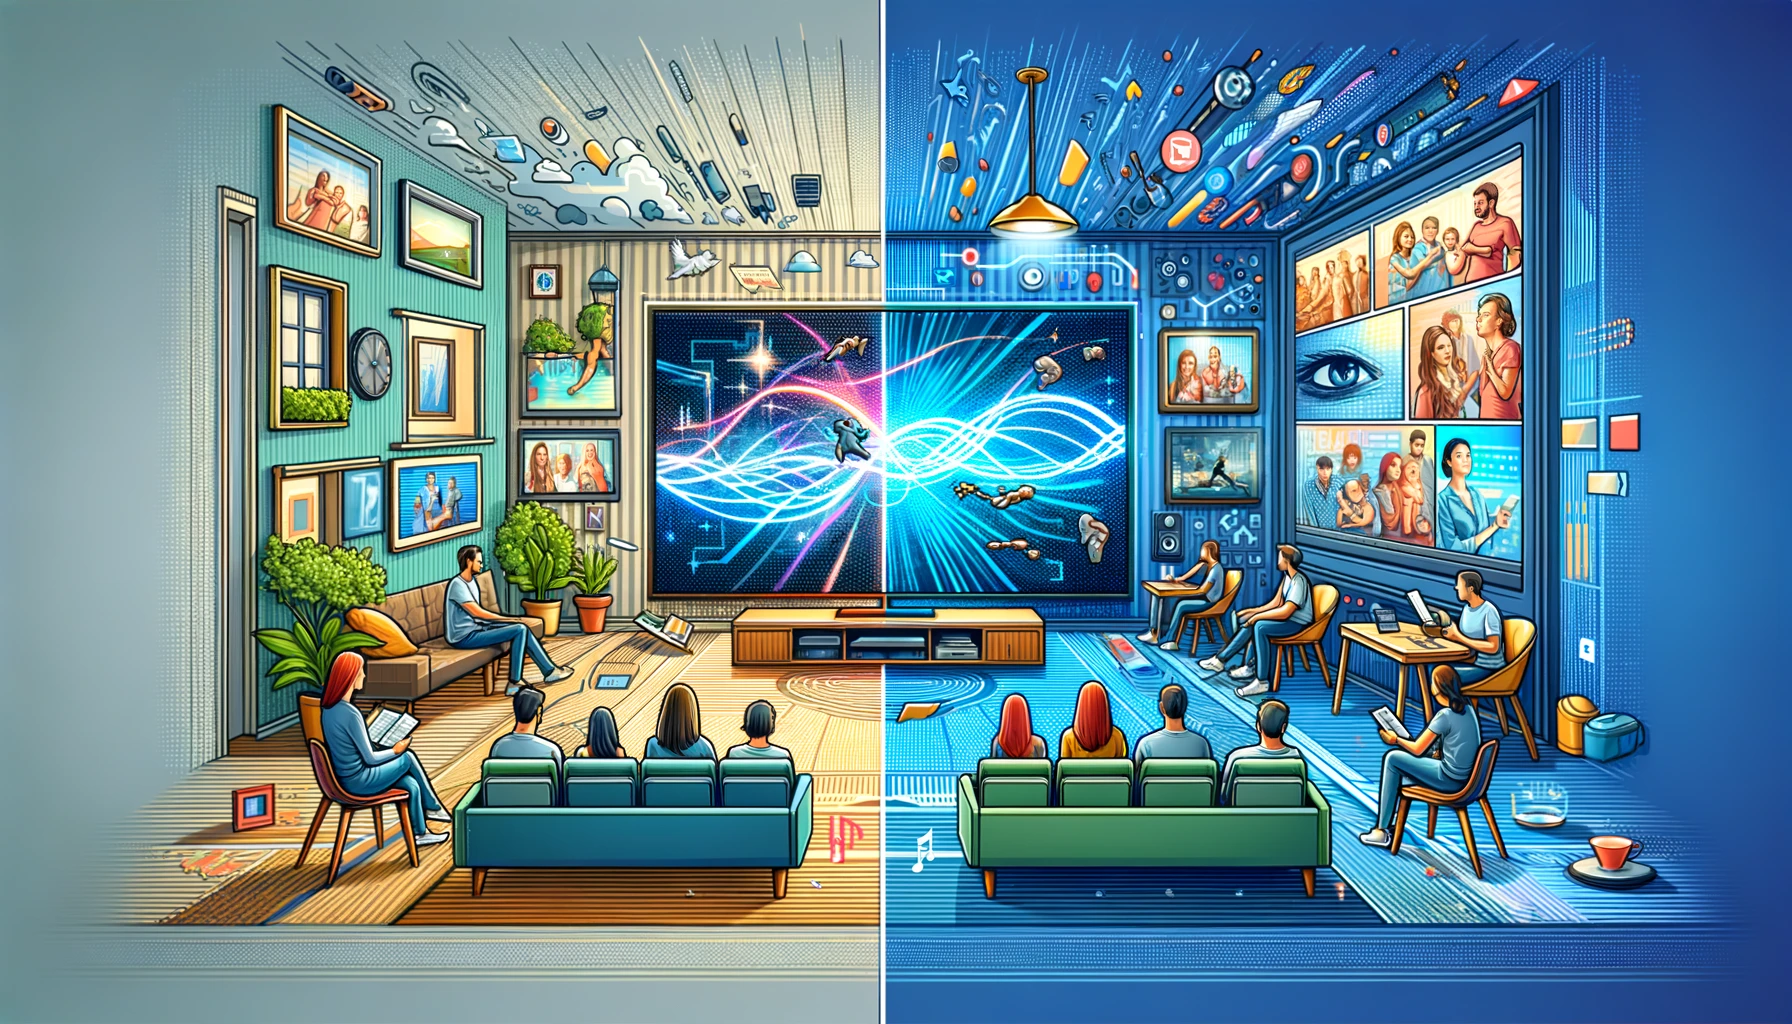 A split-screen image showing a living room with someone fast-forwarding through TV commercials on the left and a doctor's office waiting room with people attentively watching digital ads on the right.